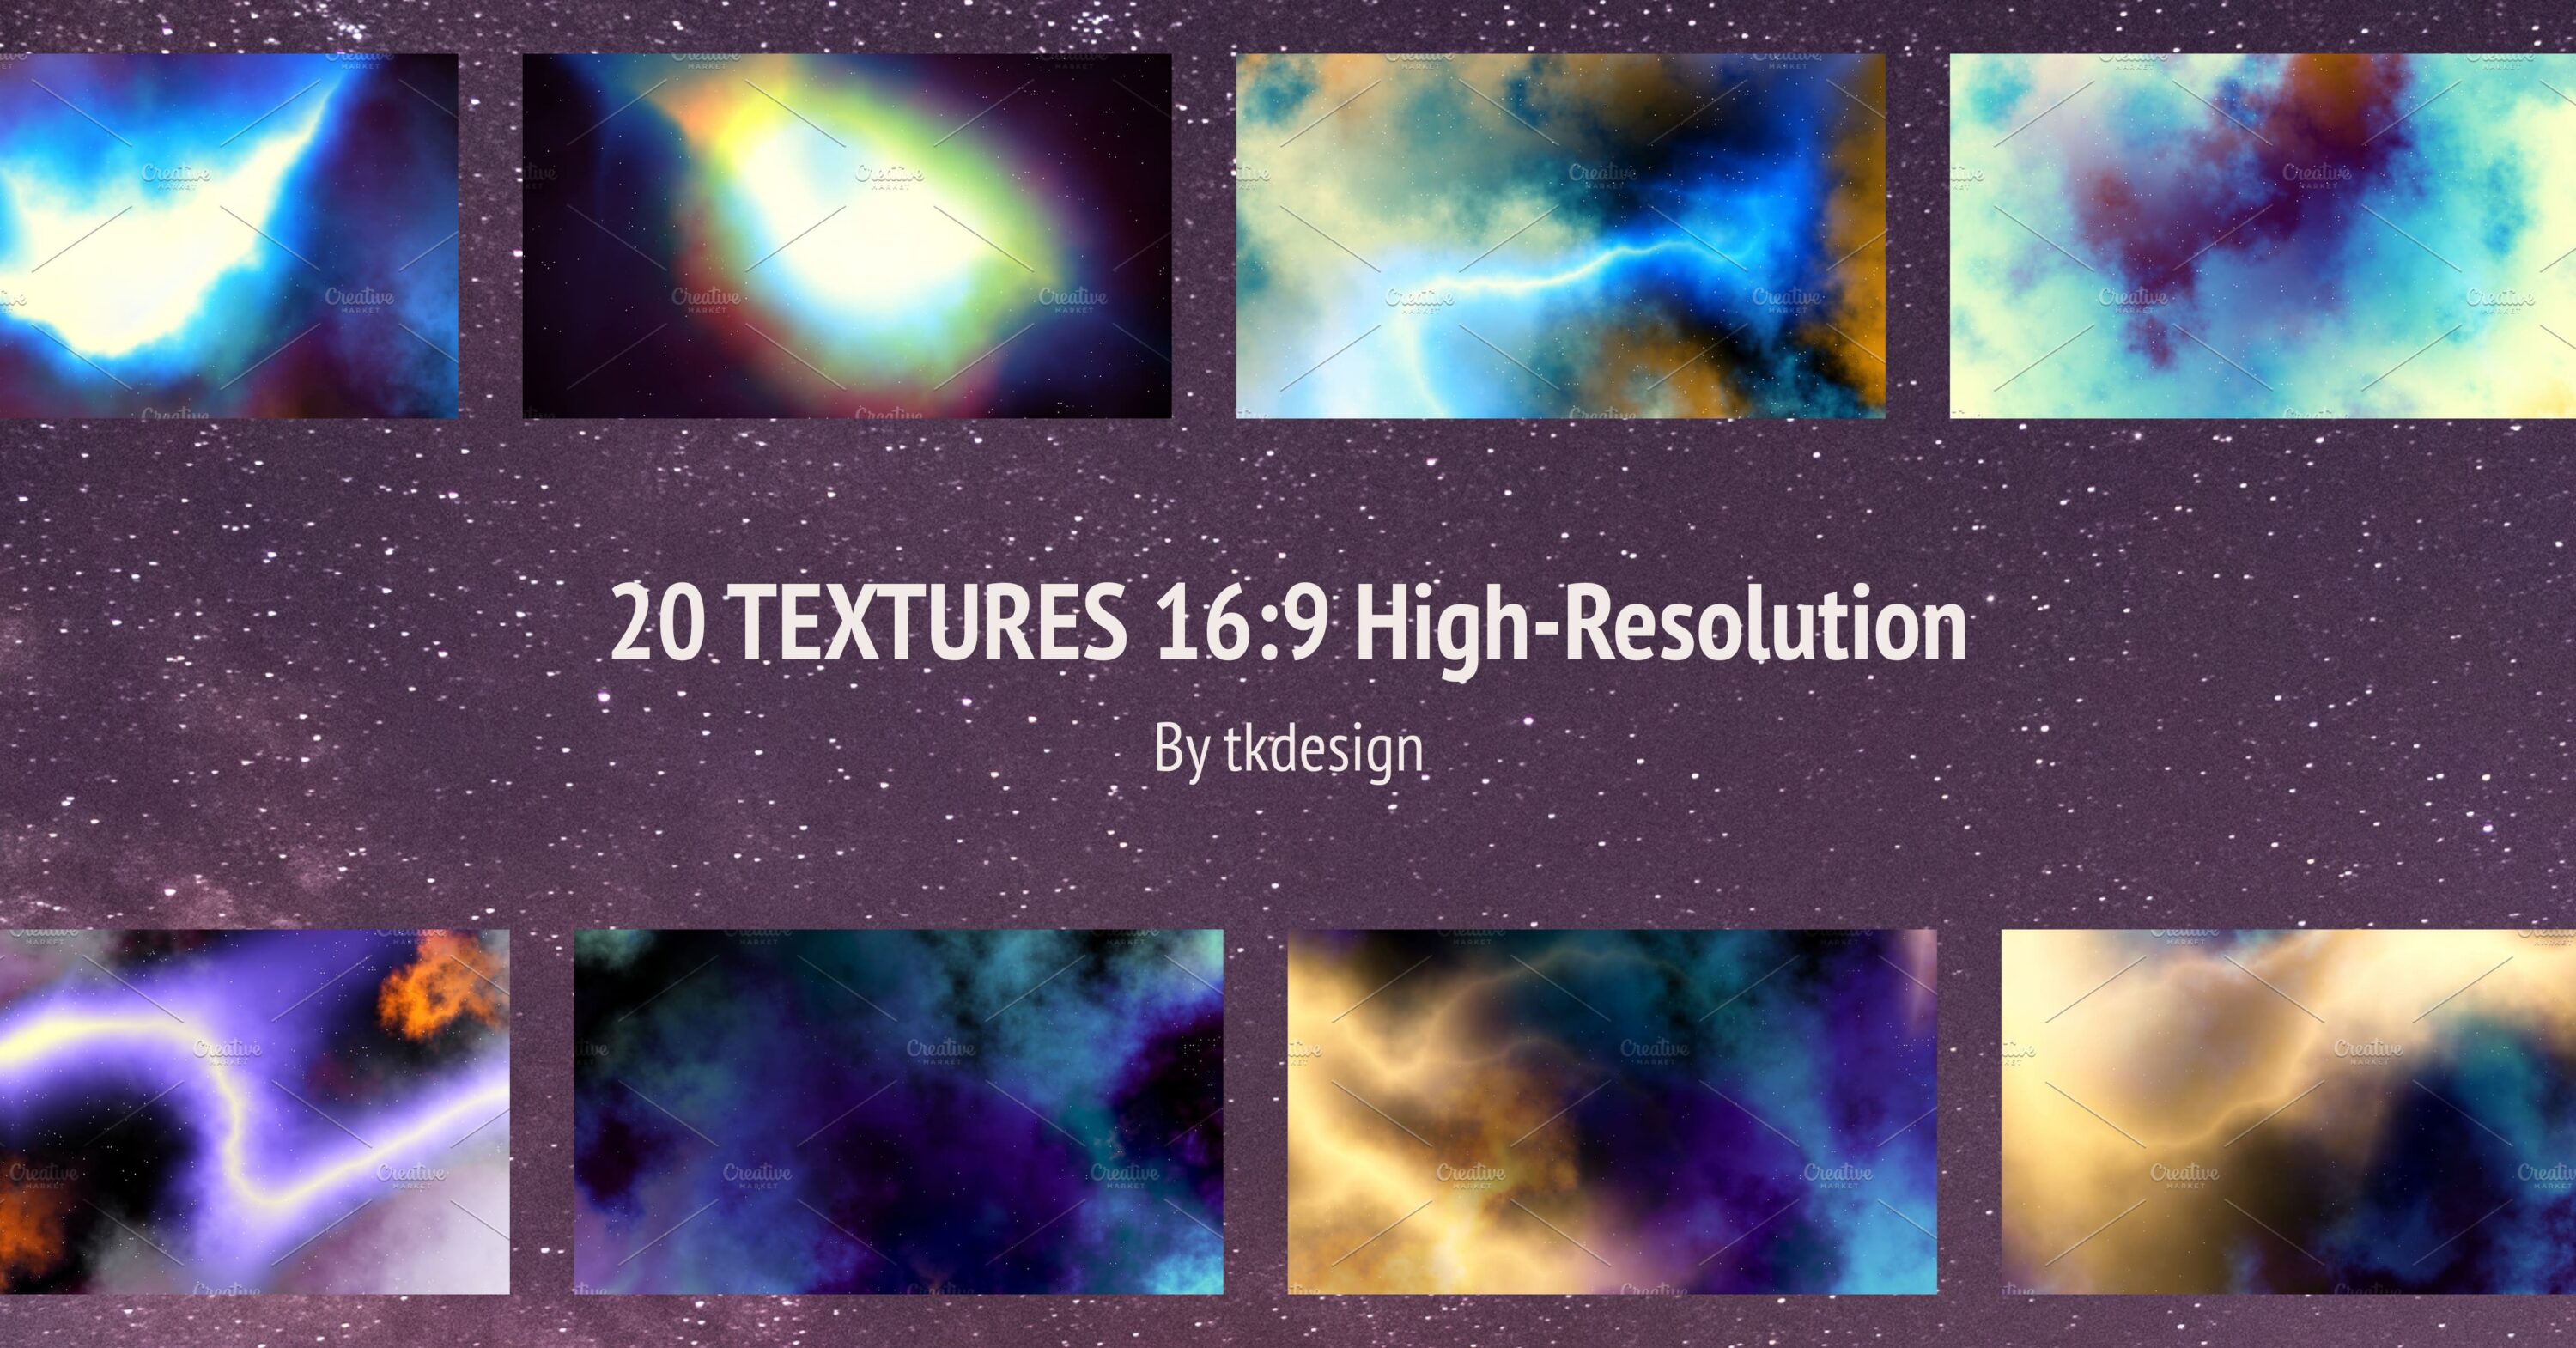 20 TEXTURES 16:9 High-Resolution facebook image.